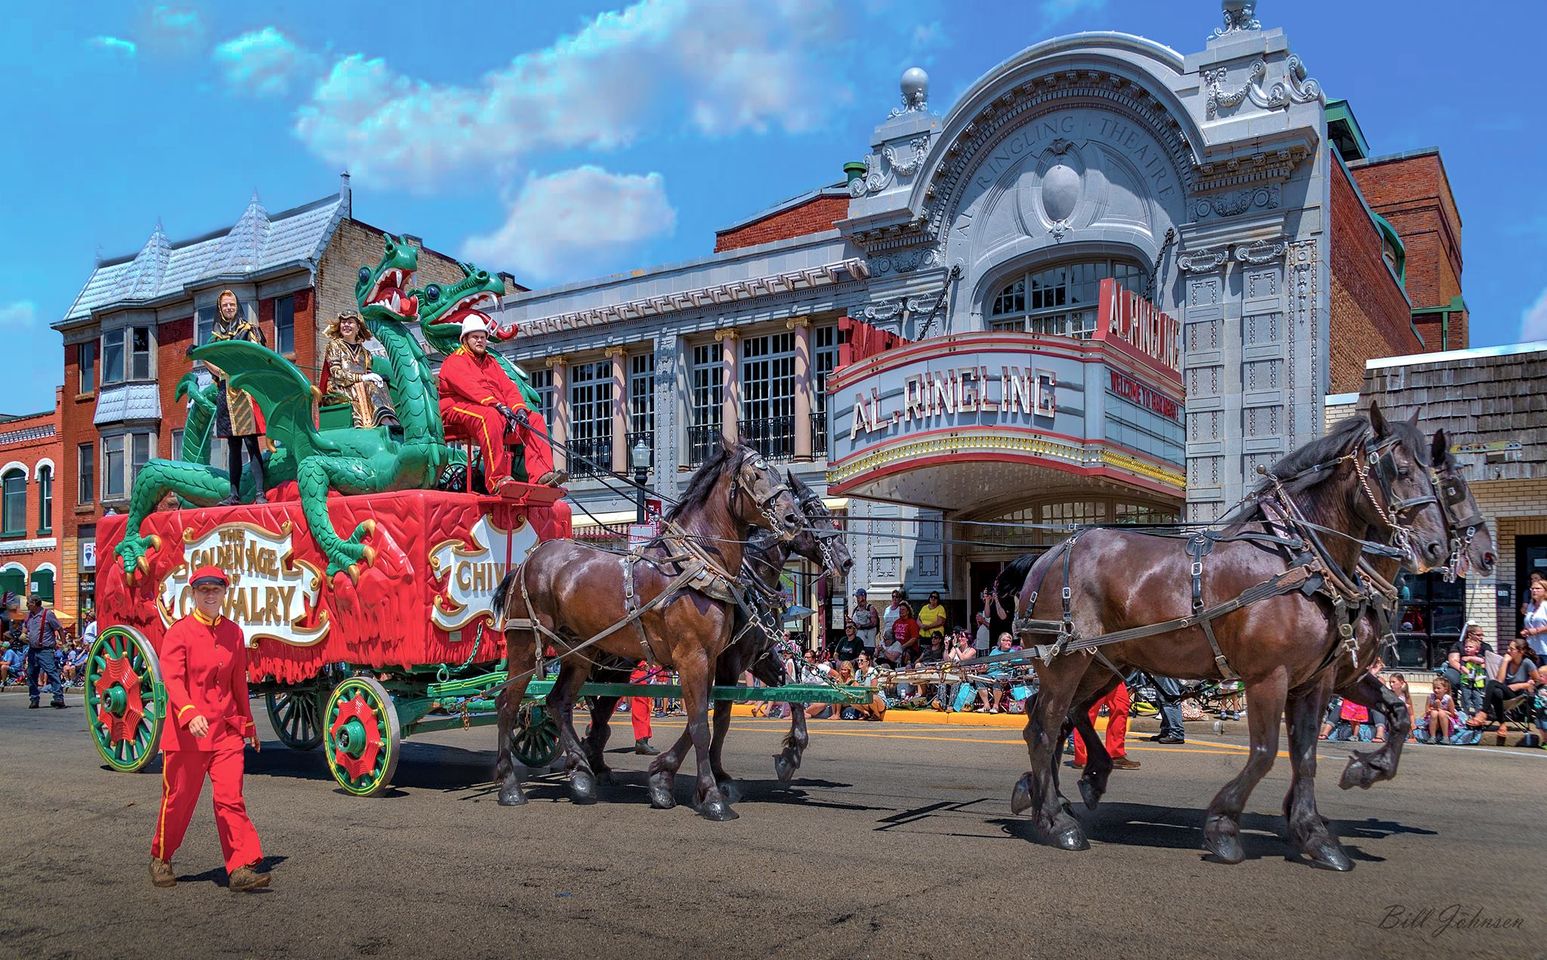 A red carriage wagon with a large green dragon sprawled over the top rides along a street in Baraboo Wisconsin pulled by a team of 4 horses with Circus World Staff wearing read guiding it a long as part of the Baraboo's Big Top Parade Event